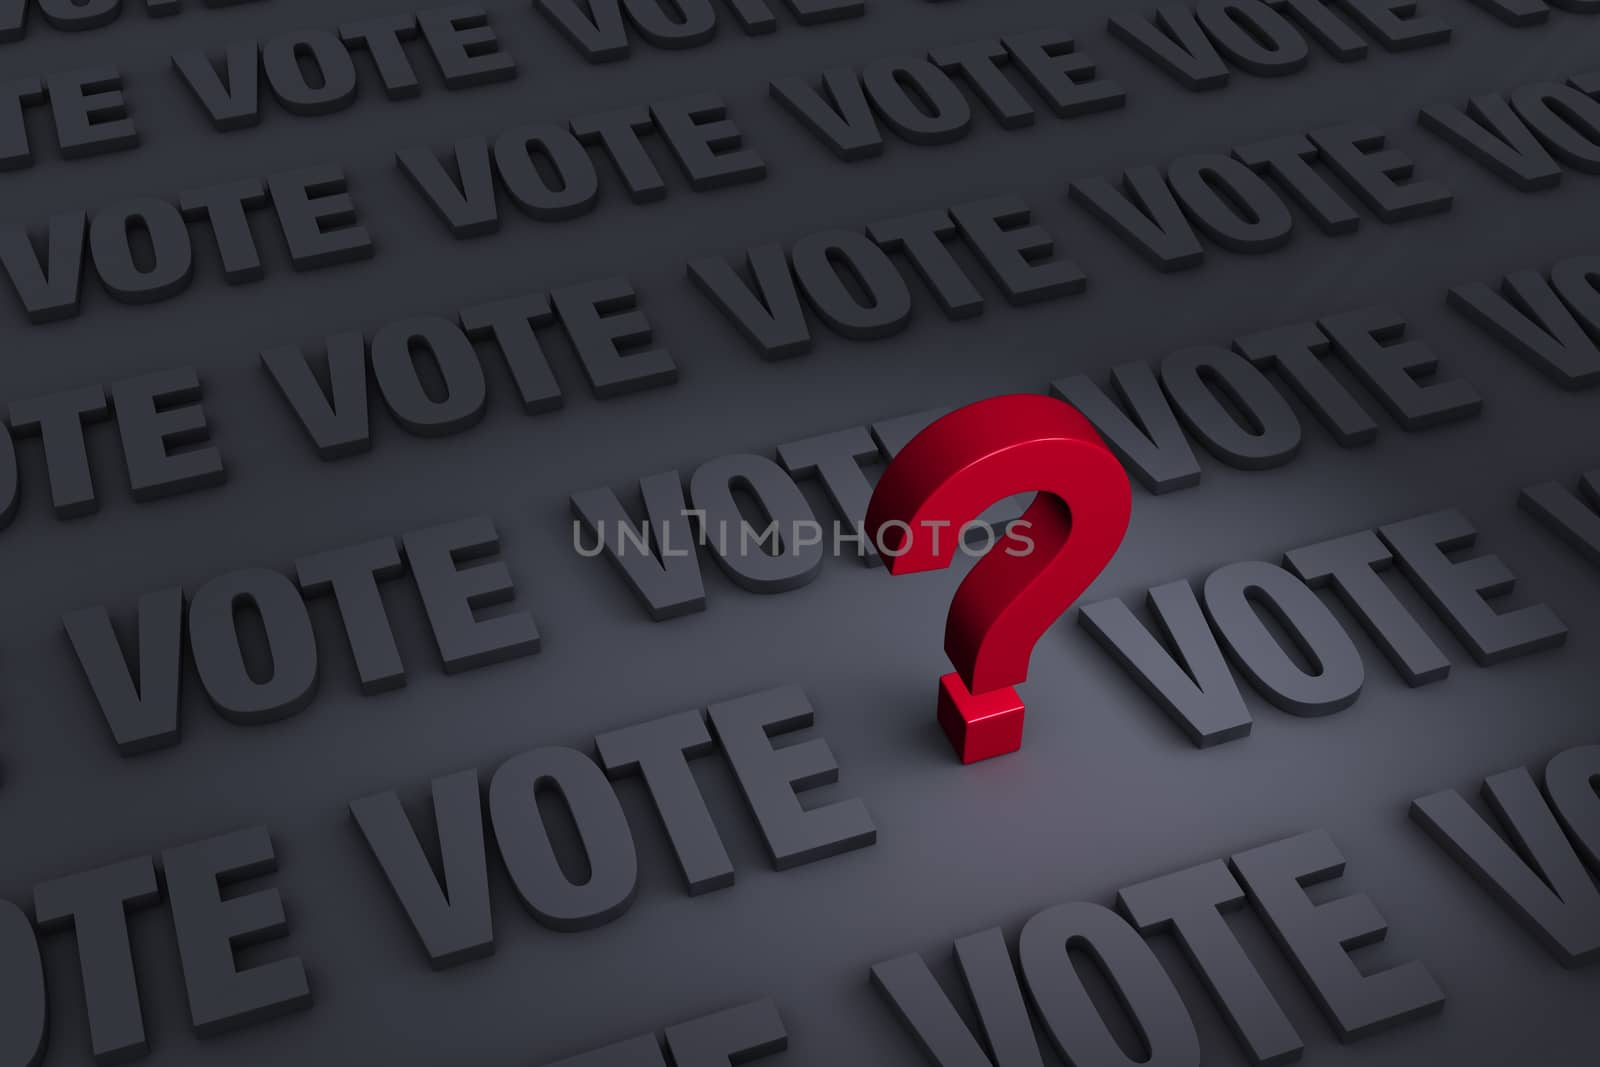 A red question mark stands out in a dark background of gray "VOTE"s receding into the distance